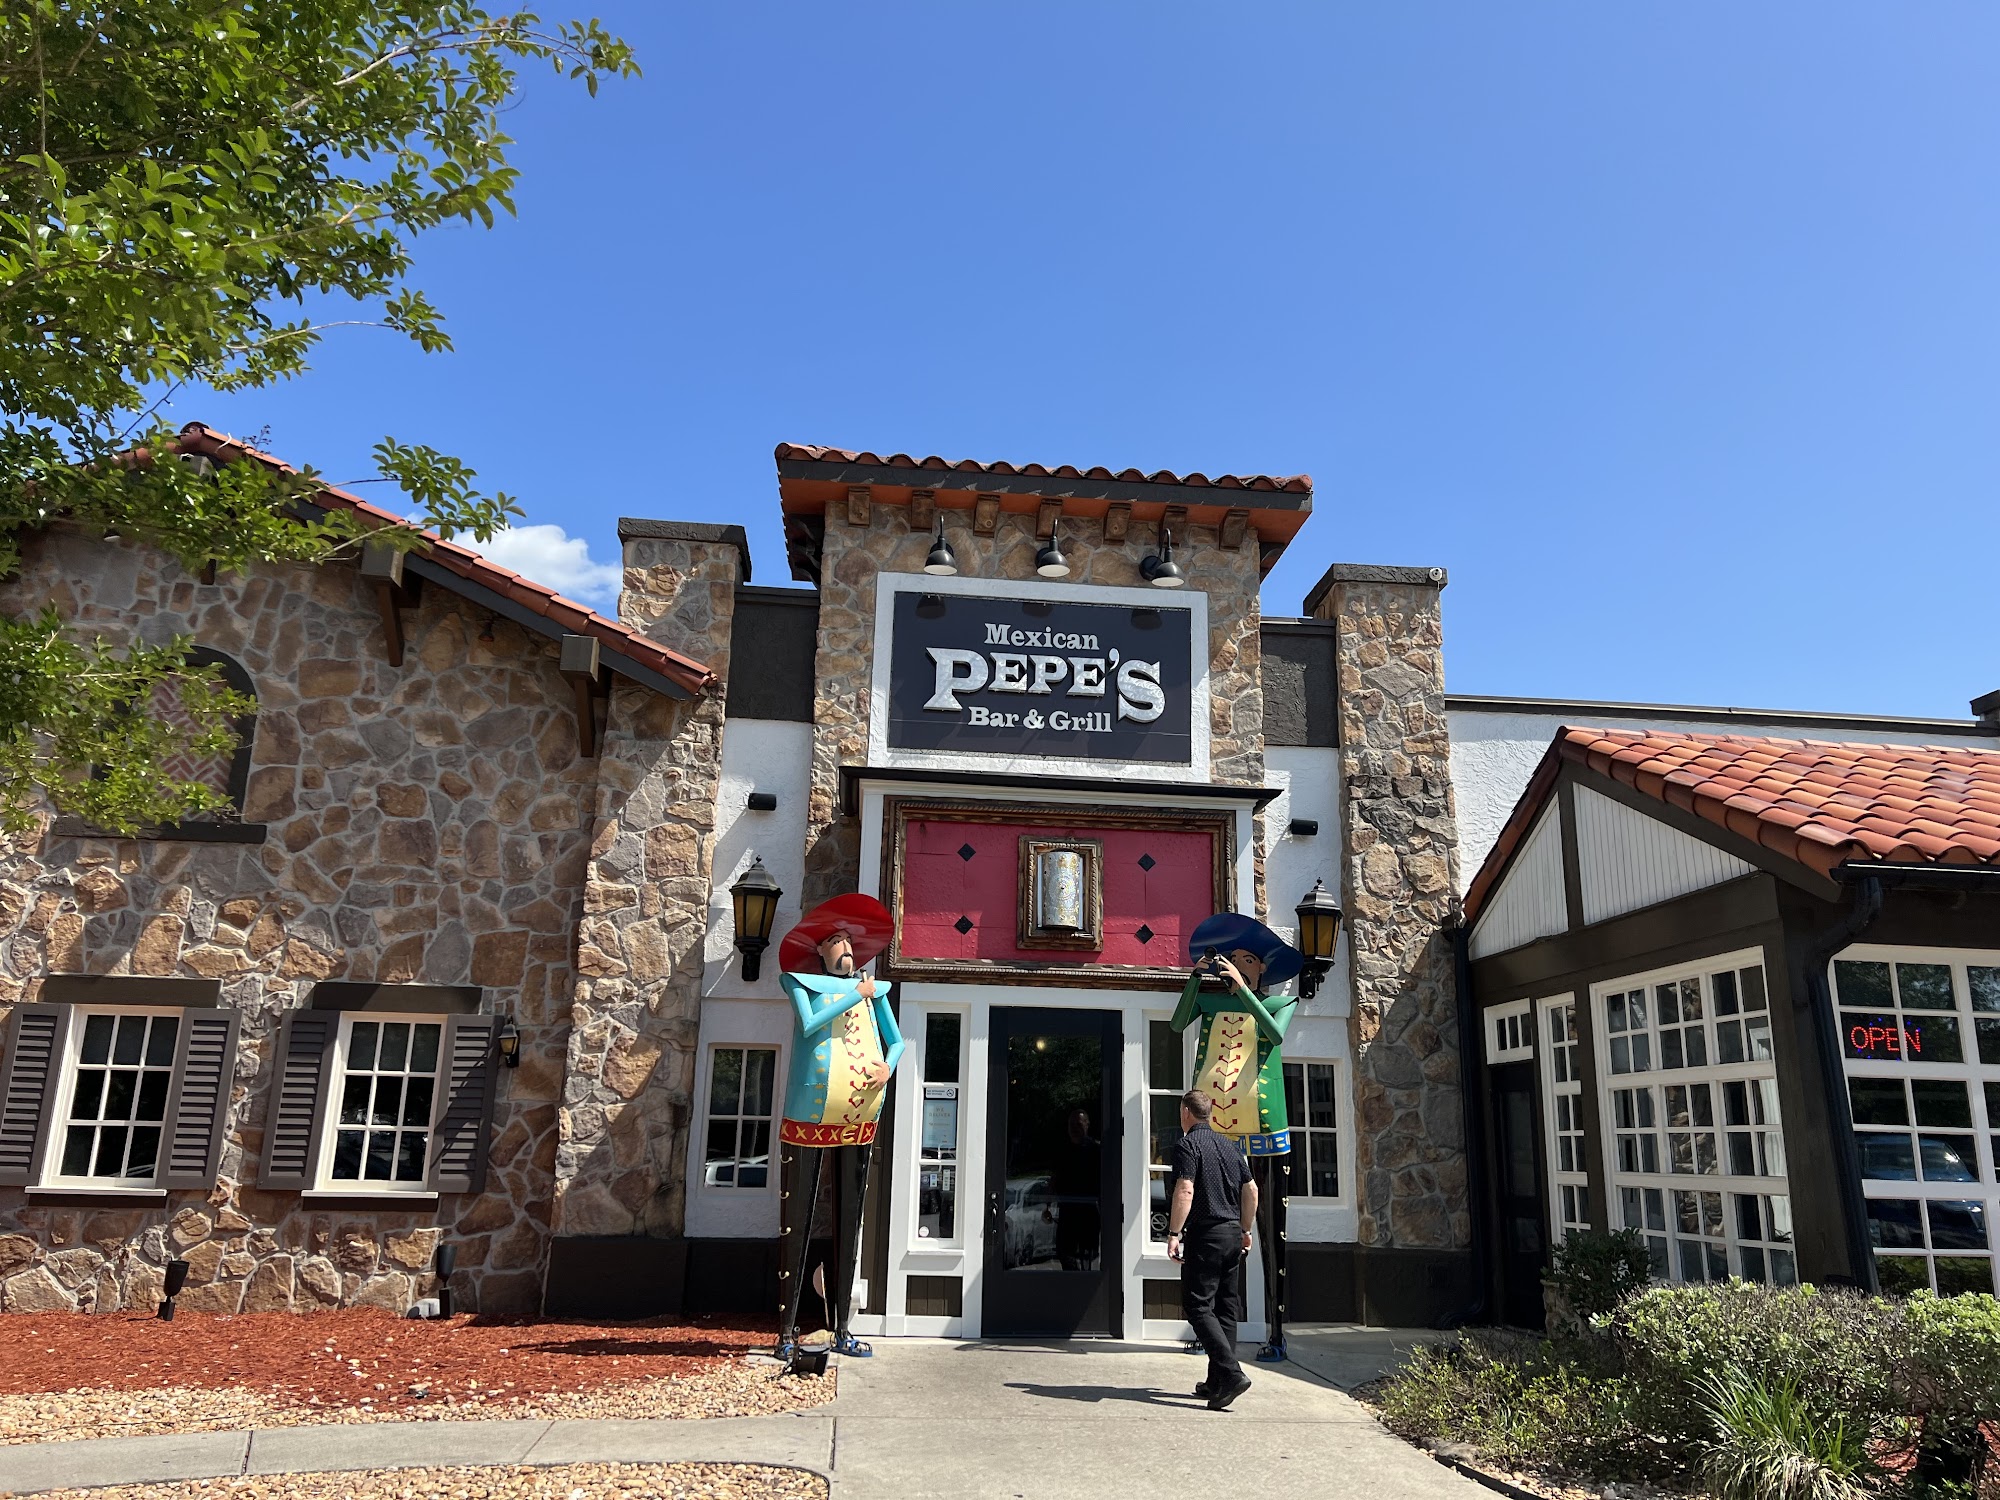 Pepe's Mexican Bar & Grill